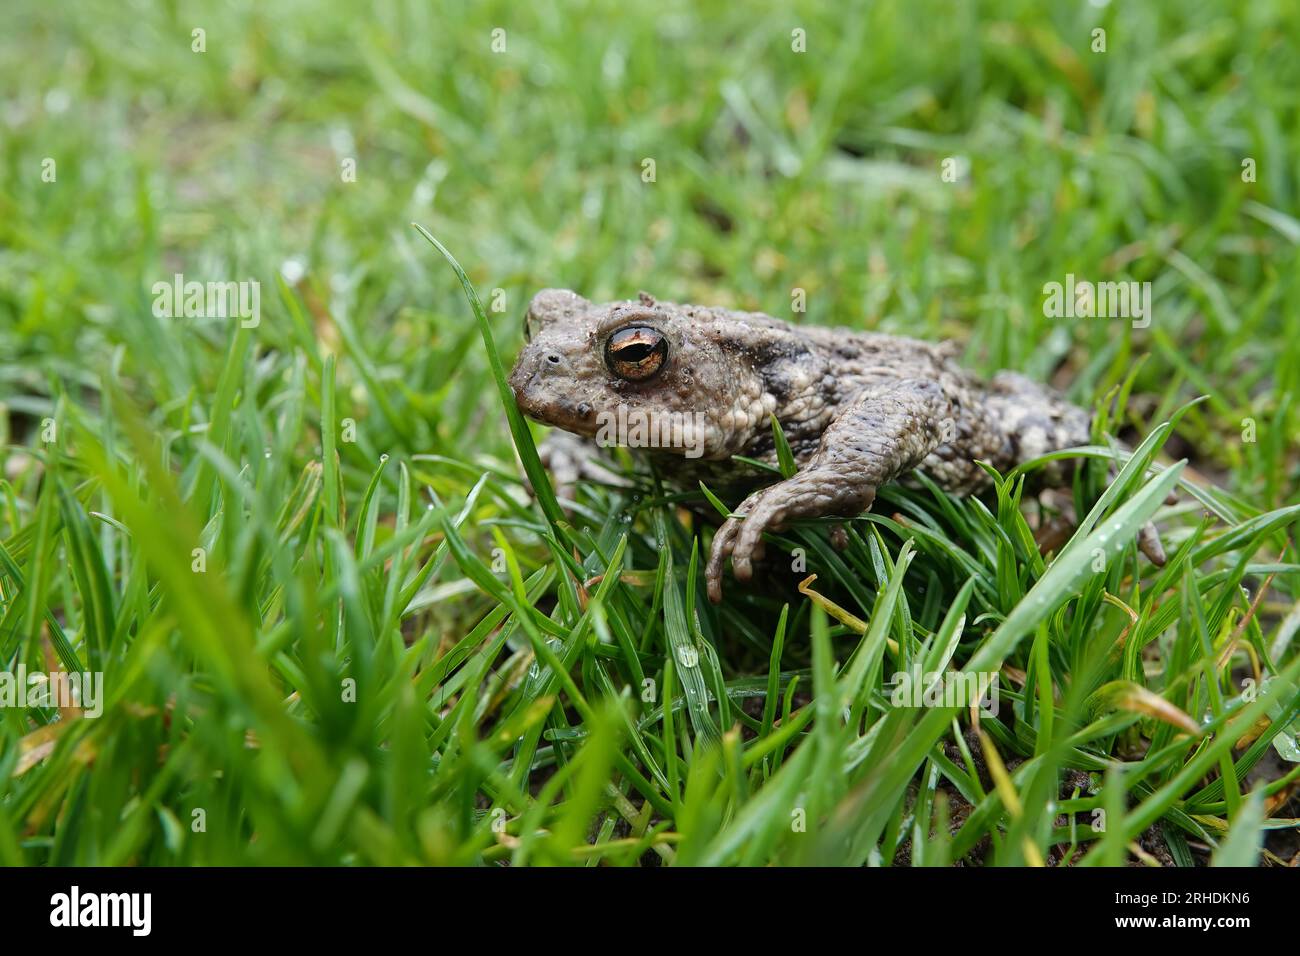 Closeup on a female European common toad, Bufo bufo sitting on the ground and grass in the garden in rainy weather Stock Photo